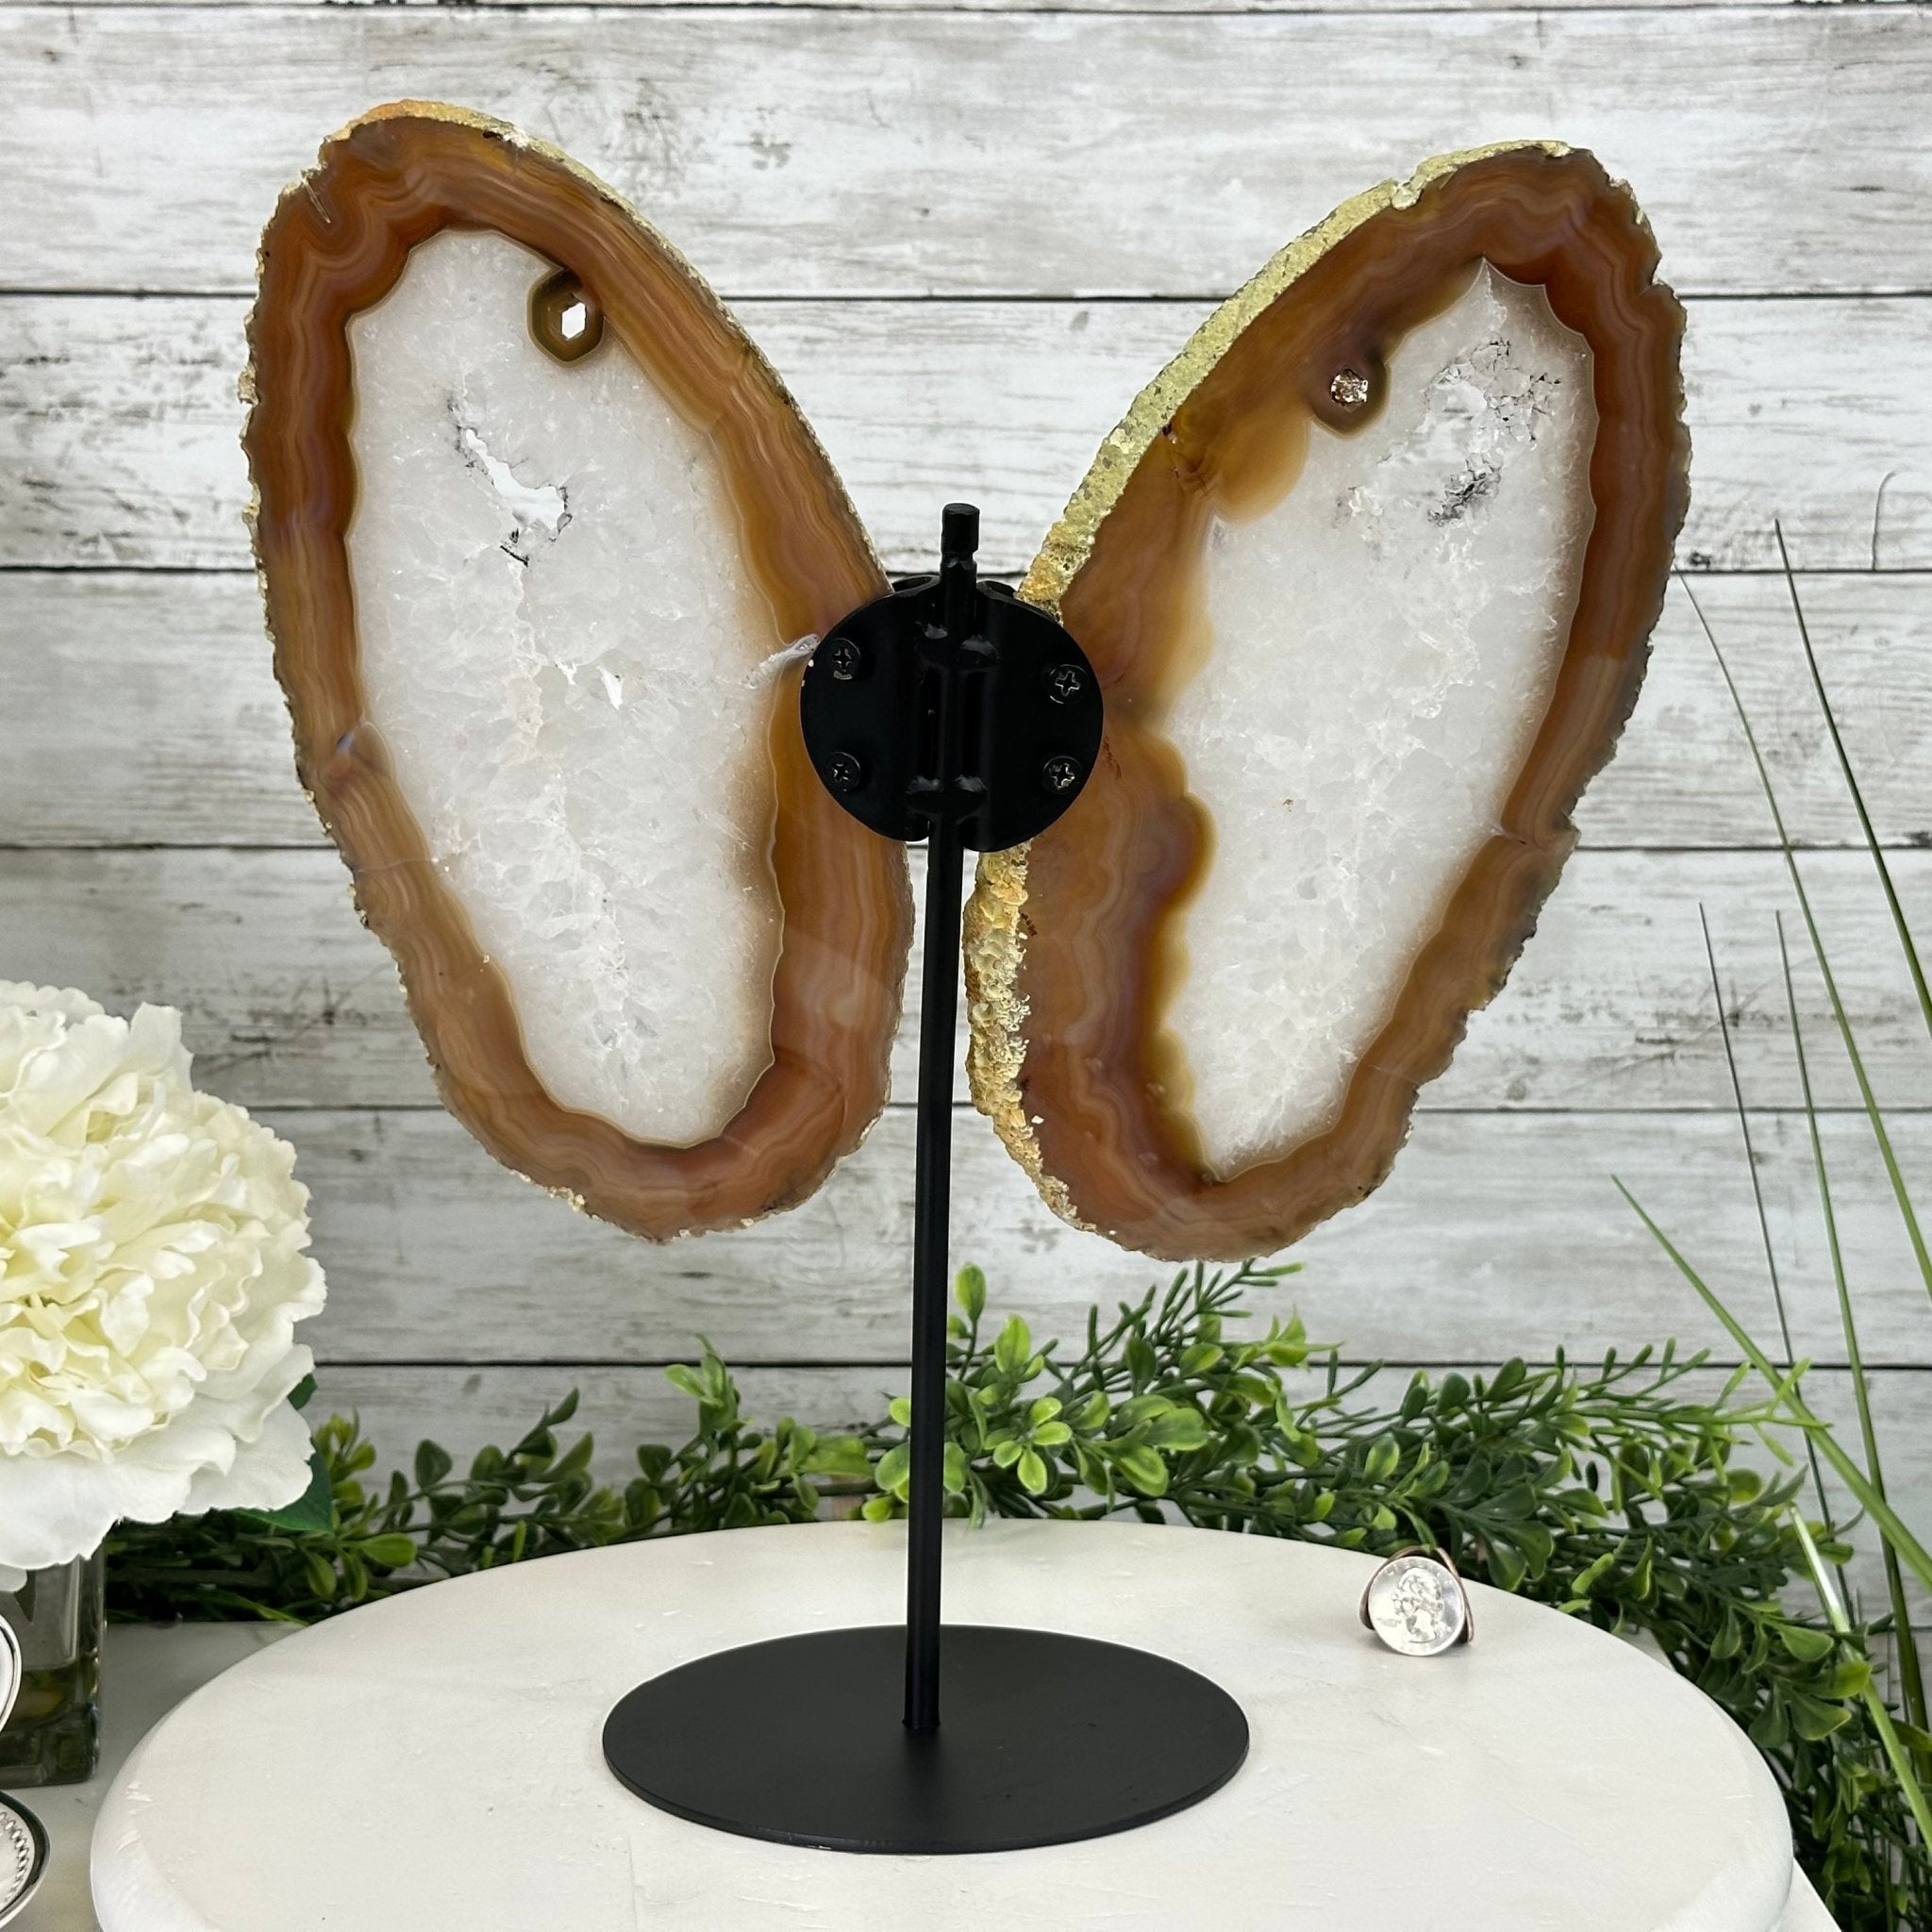 Natural Brazilian Agate "Butterfly Wings", Metal Stand, 14.5" Tall Model #5050NA-096 by Brazil Gems - Brazil GemsBrazil GemsNatural Brazilian Agate "Butterfly Wings", Metal Stand, 14.5" Tall Model #5050NA-096 by Brazil GemsAgate Butterfly Wings5050NA-096